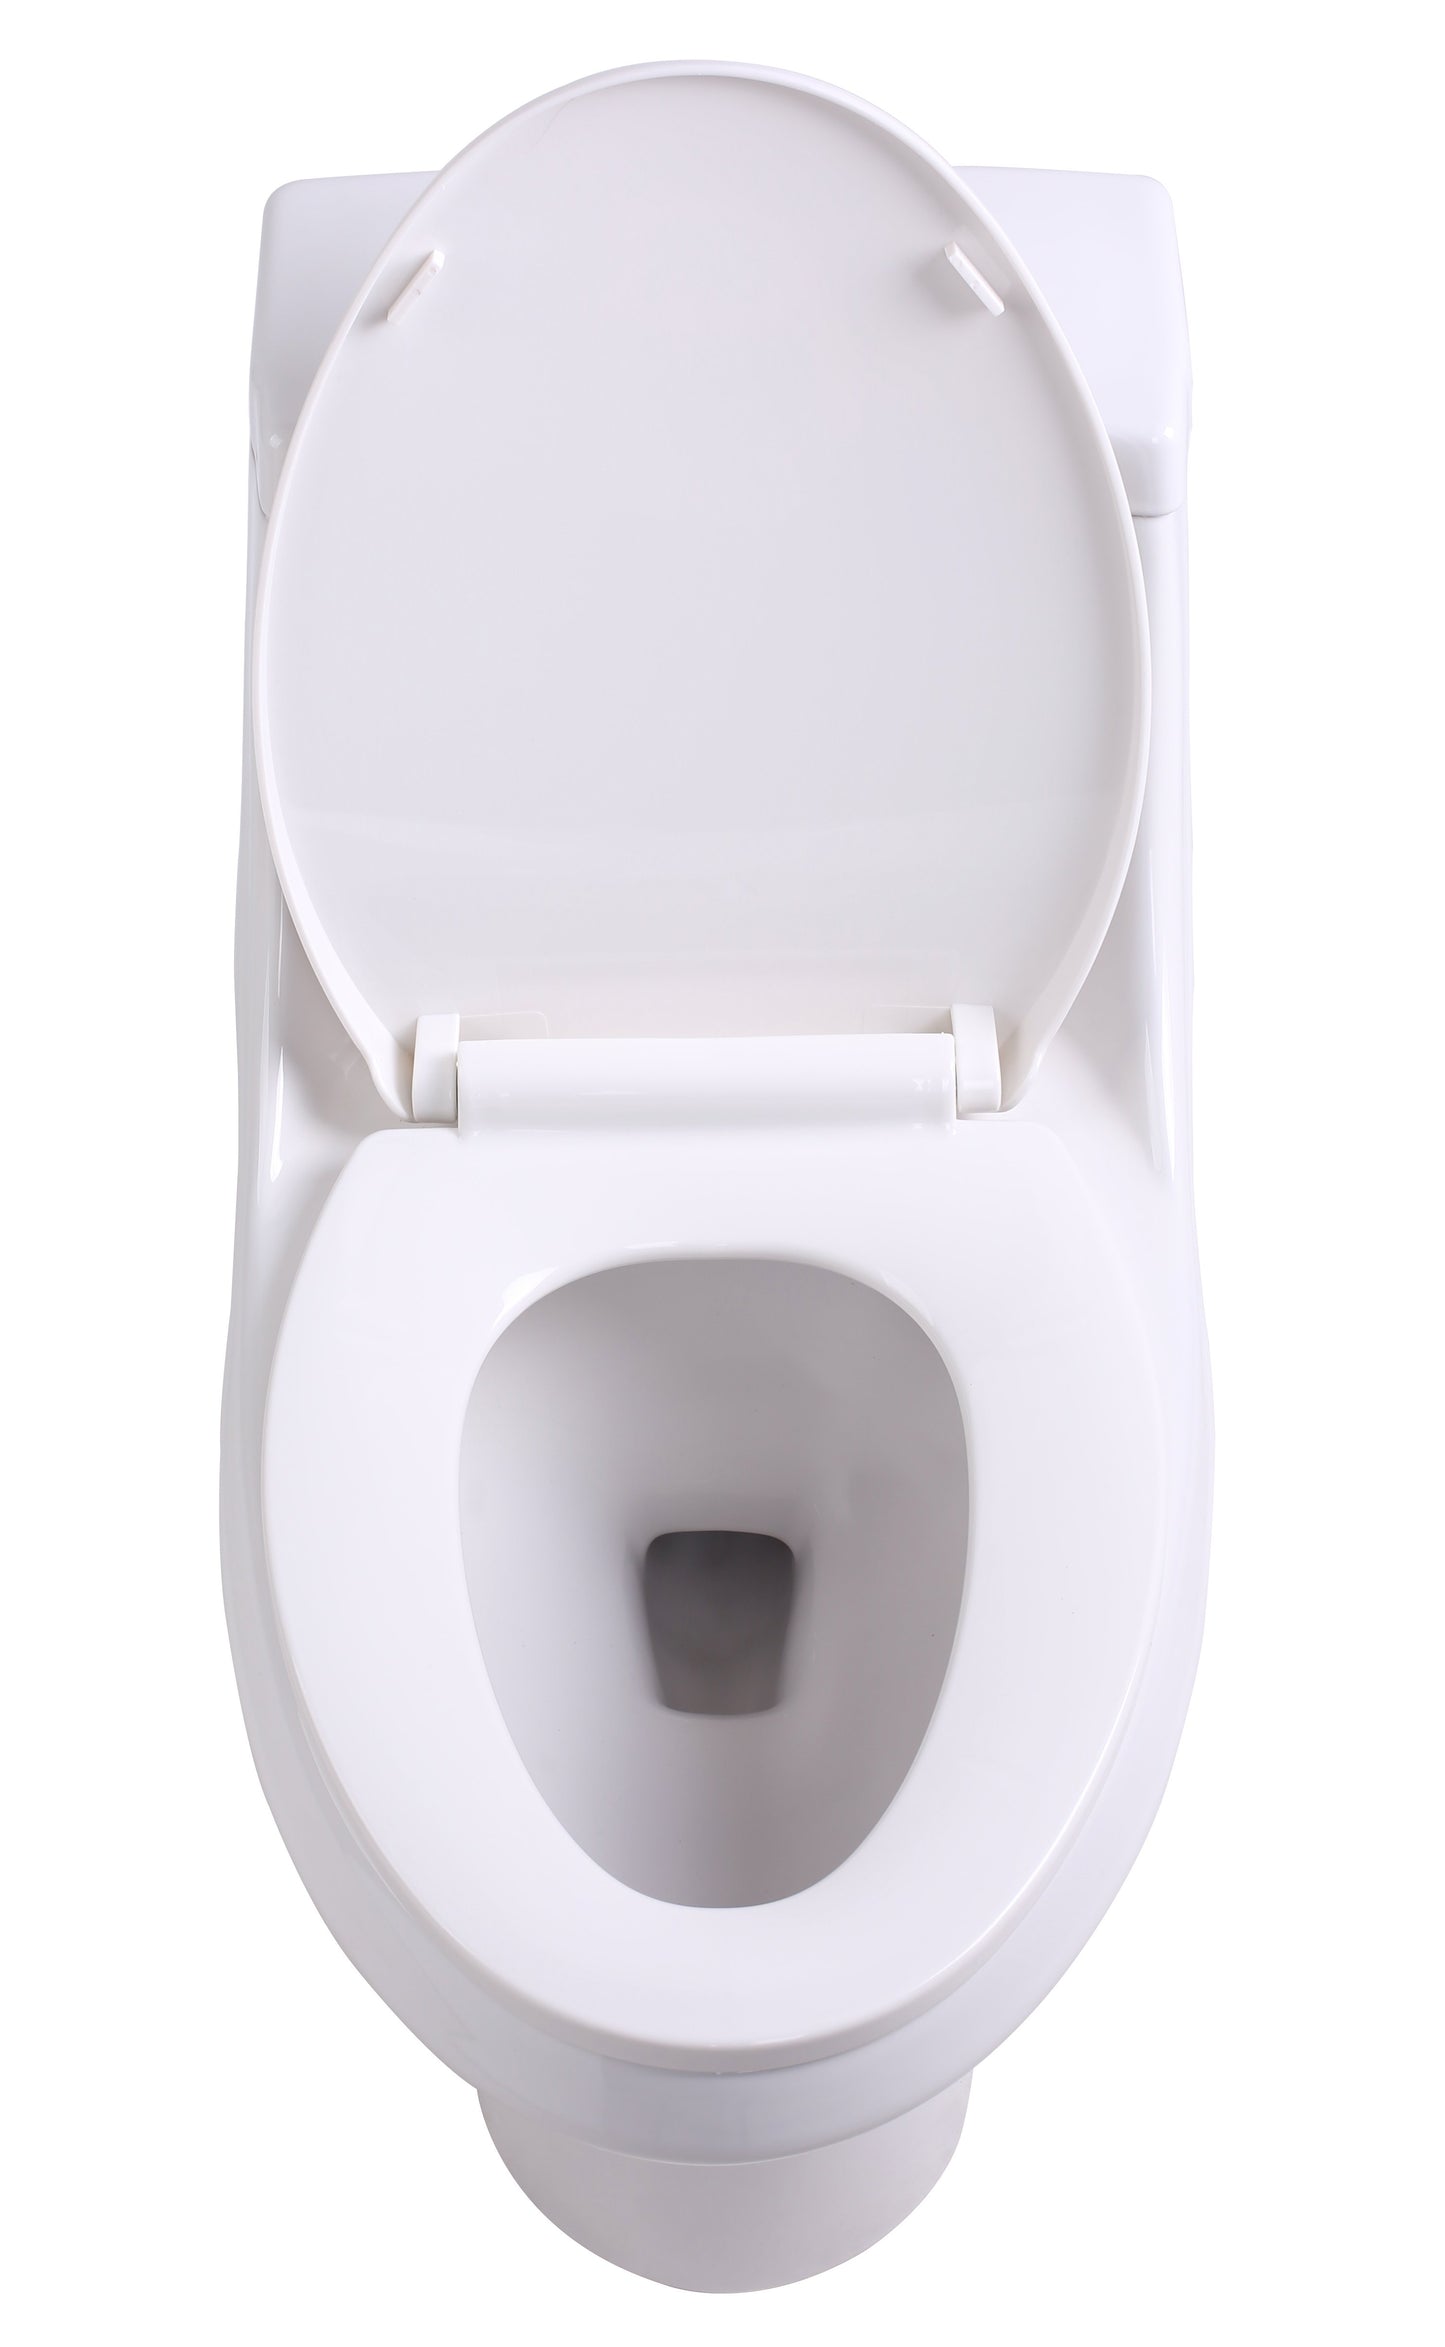 Odin 1-piece 1.28 GPF Dual Flush Elongated Toilet in White - Luxe Bathroom Vanities